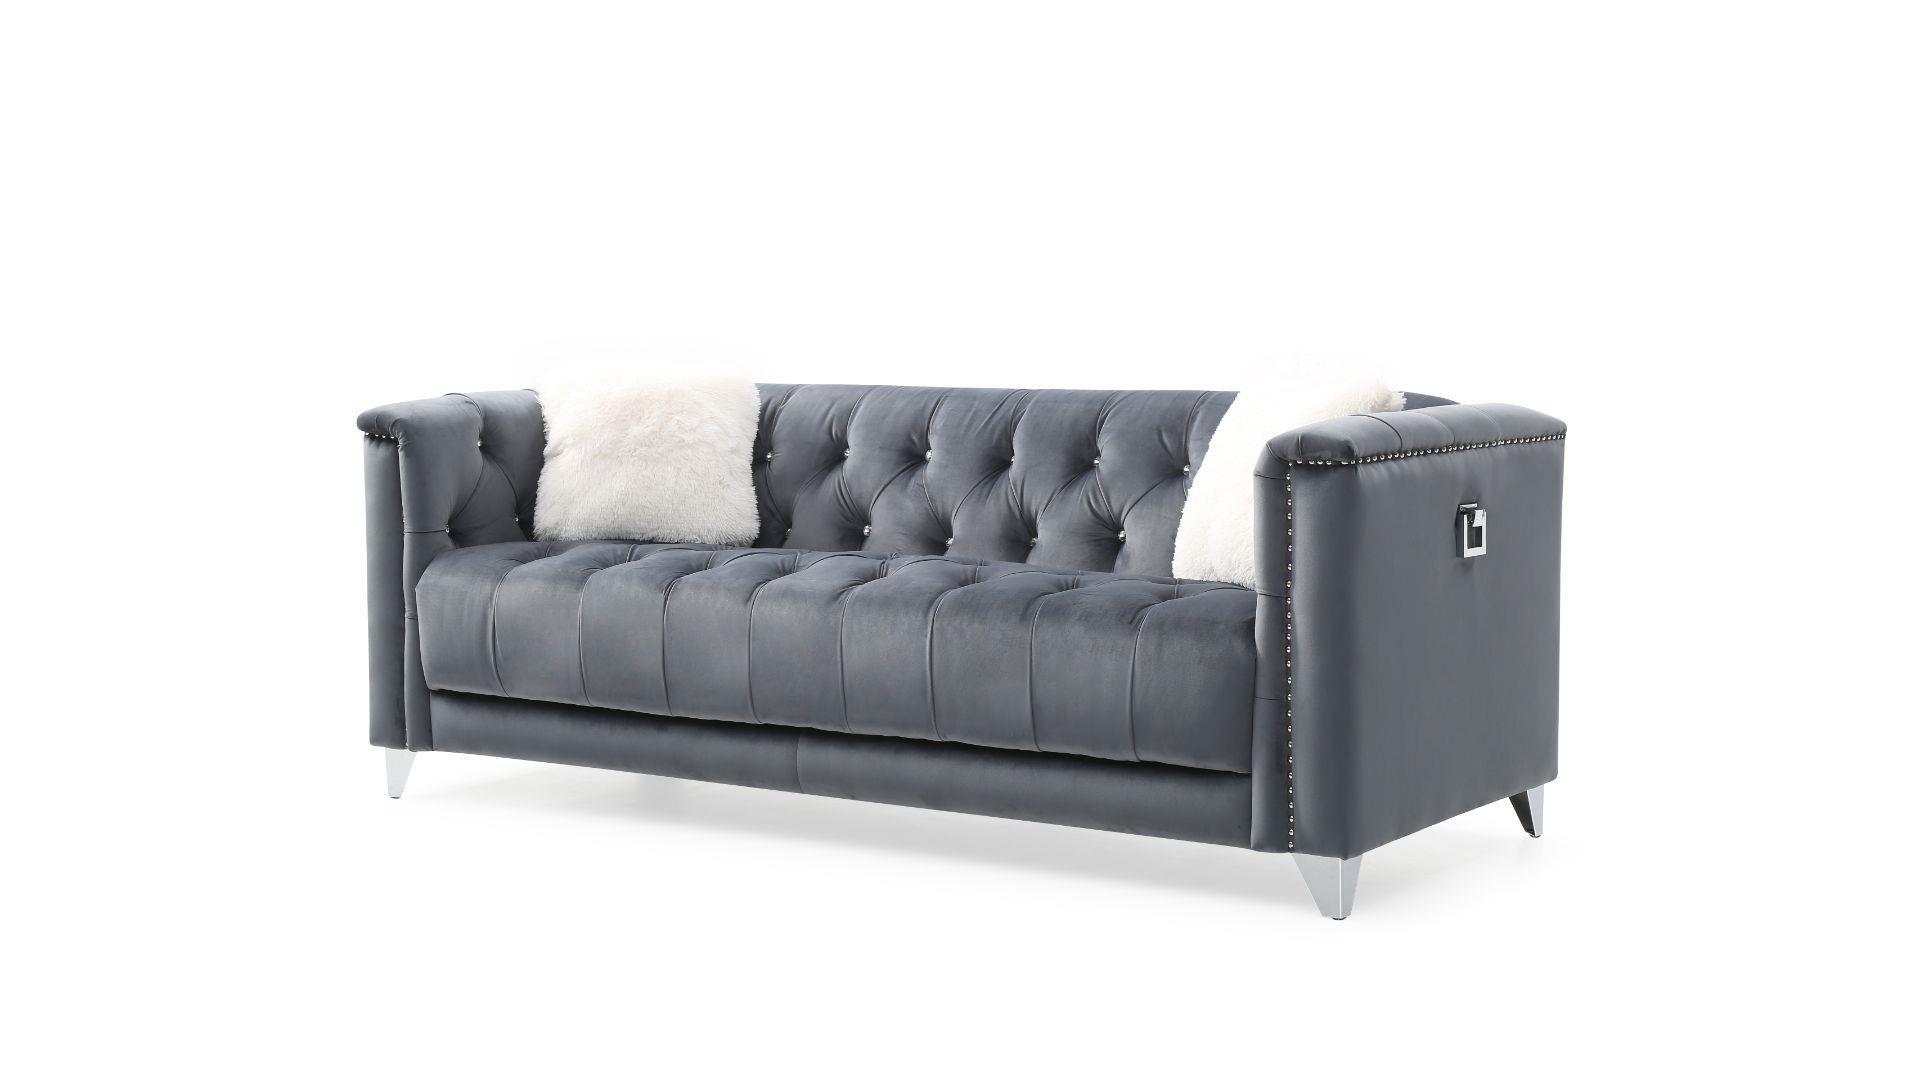 Contemporary, Modern Sofa RUSSELL 733569324316 in Gray Fabric